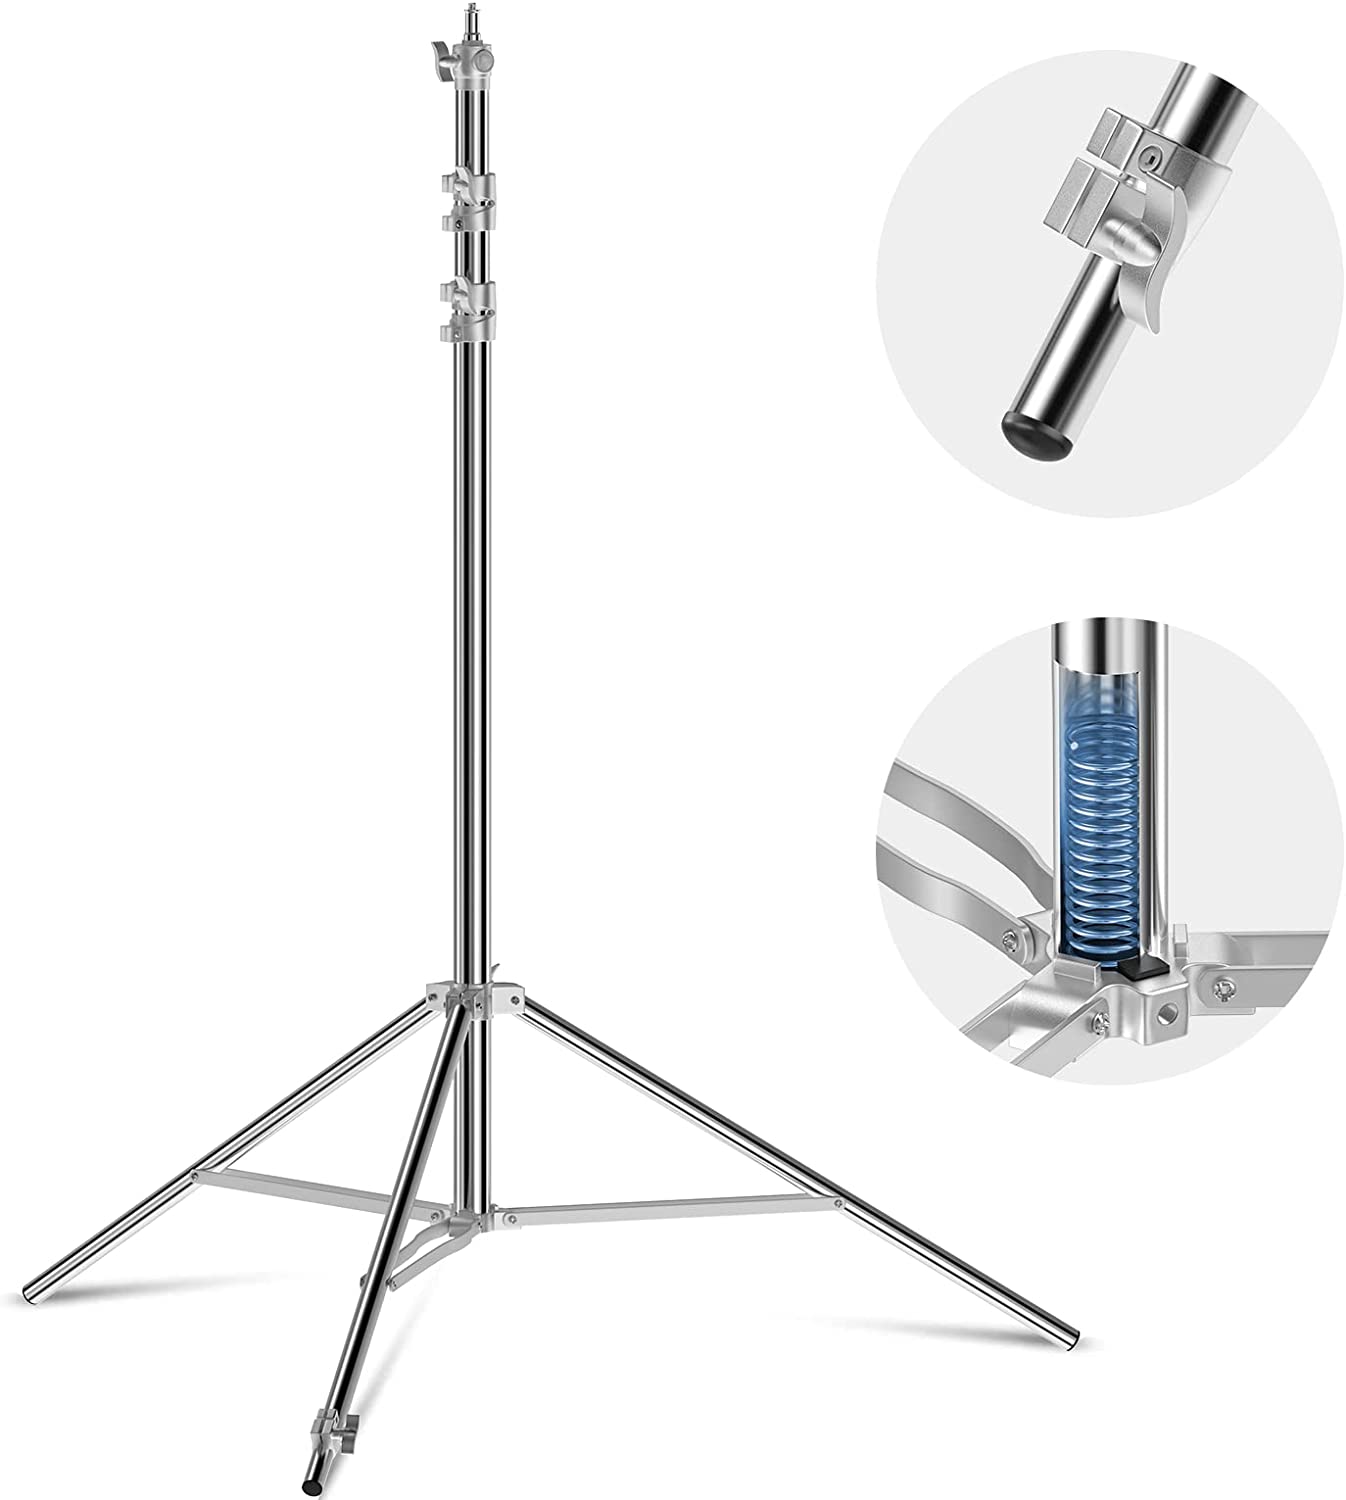 8.5ft Stainless Steel Heavy Duty Light Stand